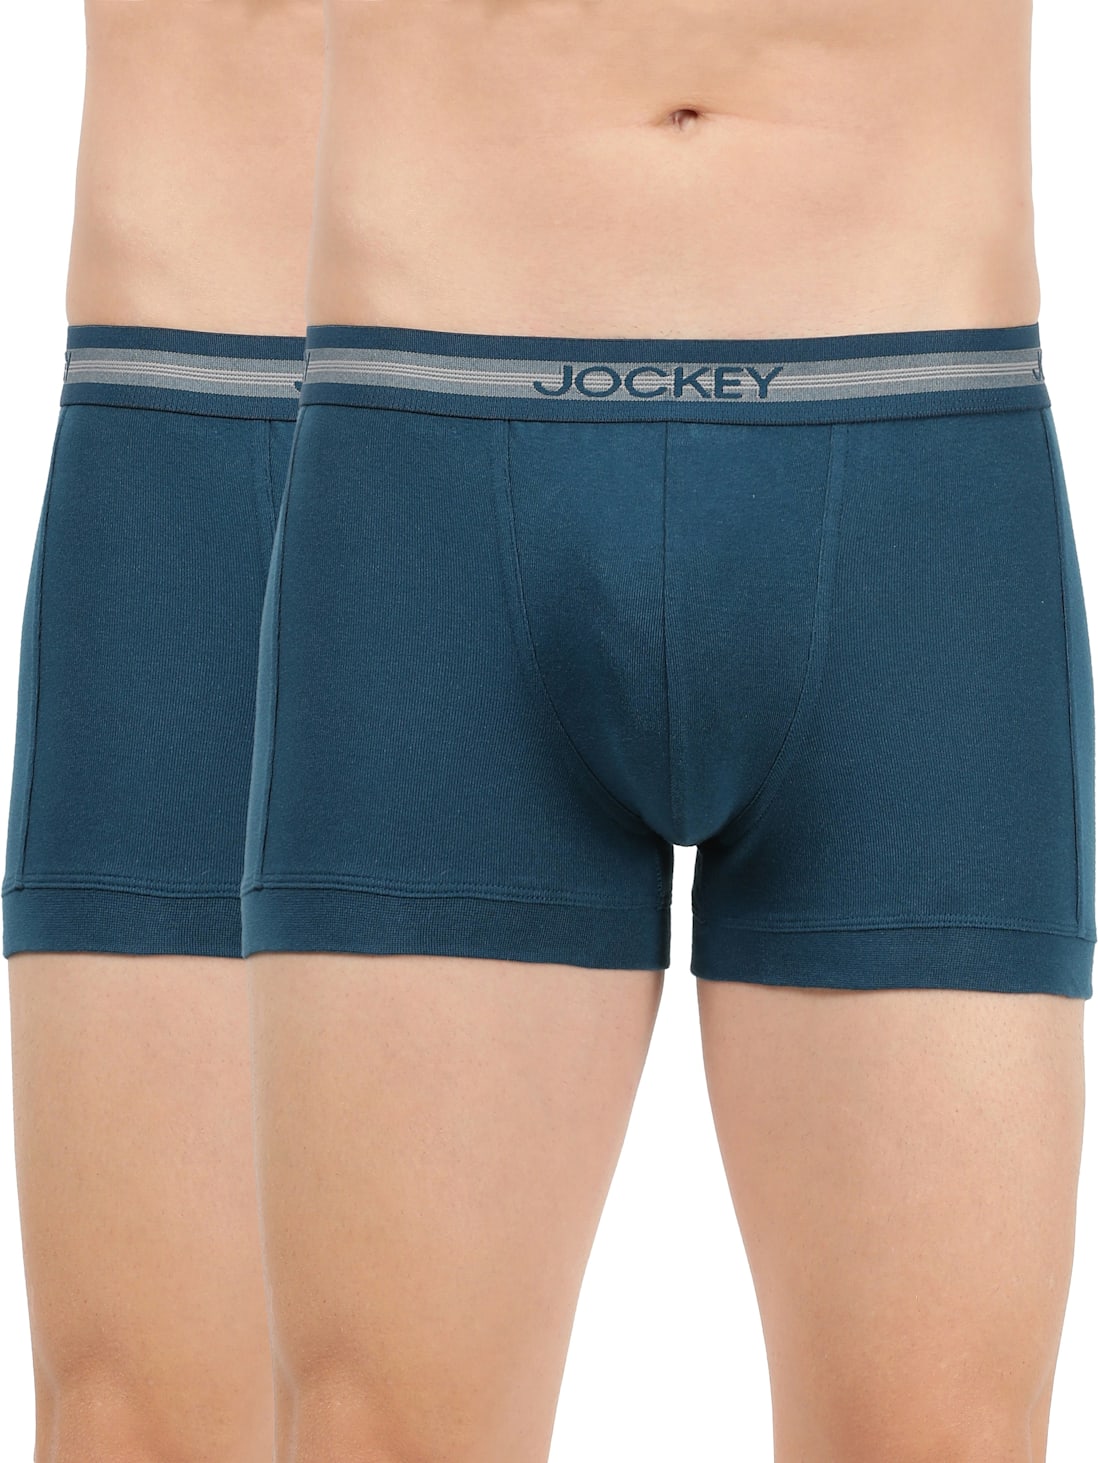 Jockey Assorted Men's Super Combed Cotton Rib Solid Trunk with Stay Fresh Properties - Elance Trunk 1015 Pack of 2 - ShopIMO